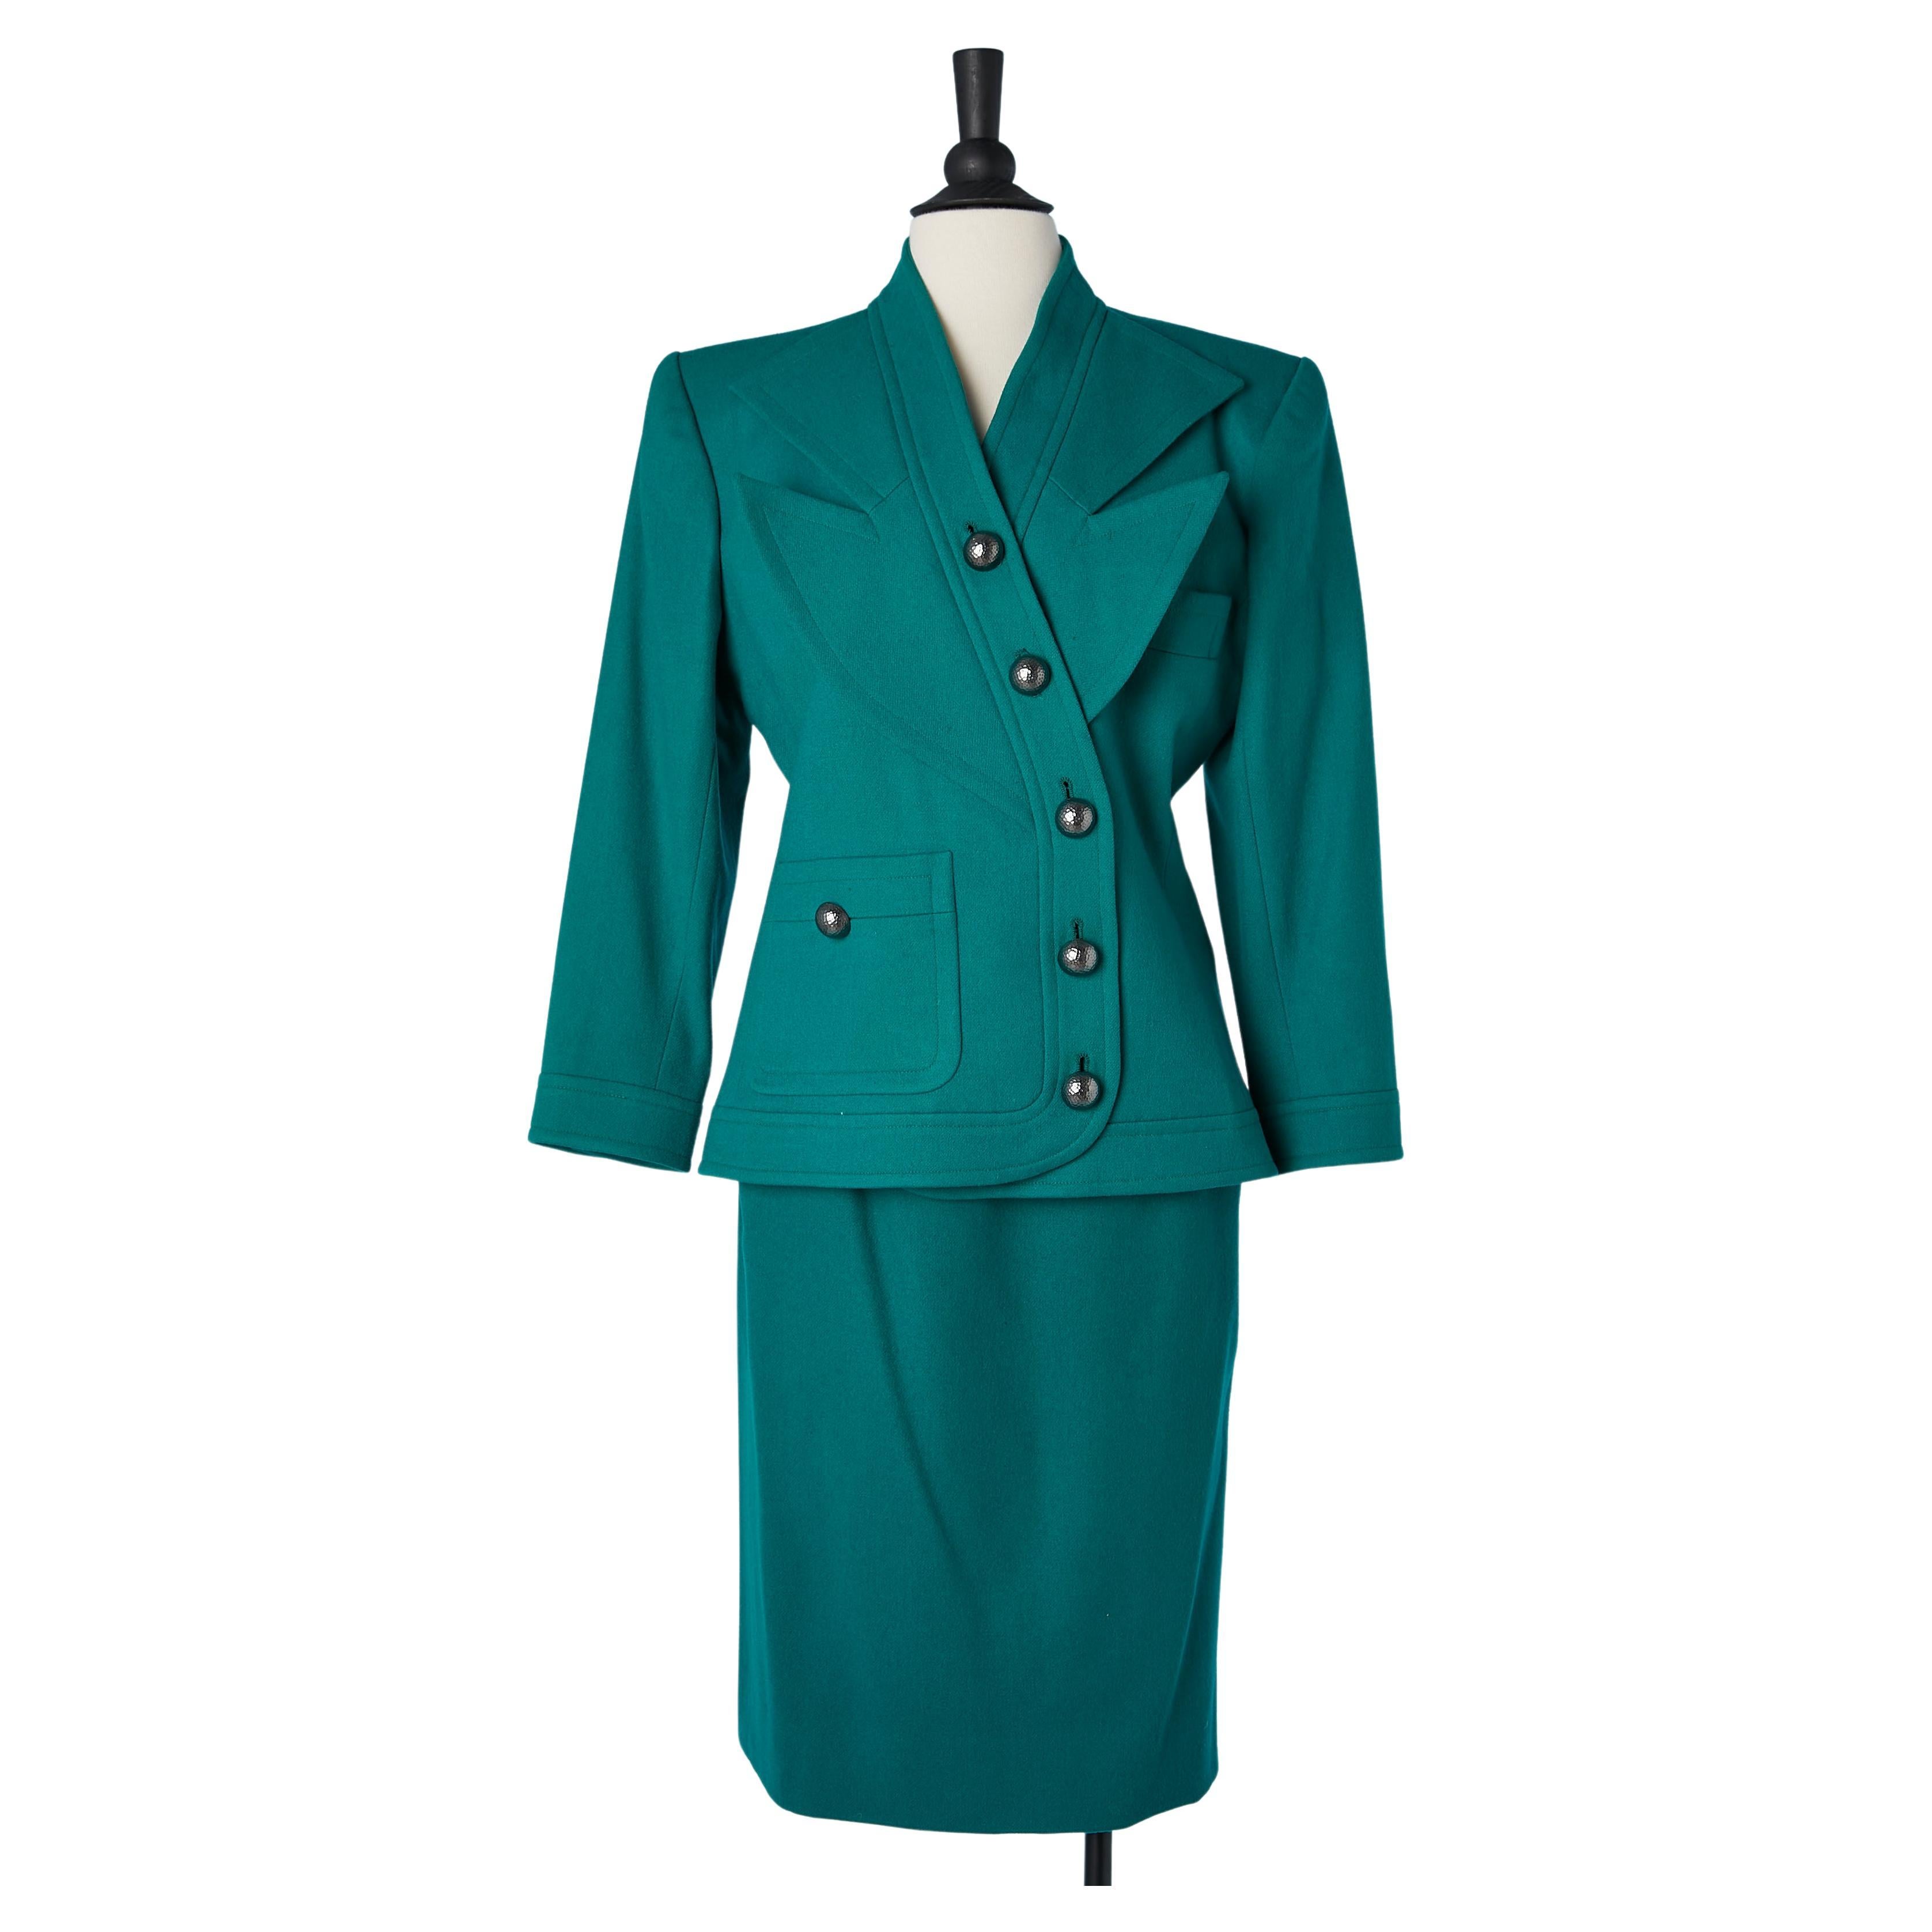 Green wool skirt-suit with graphic collar Saint Laurent Rive Gauche Circa 1980's For Sale